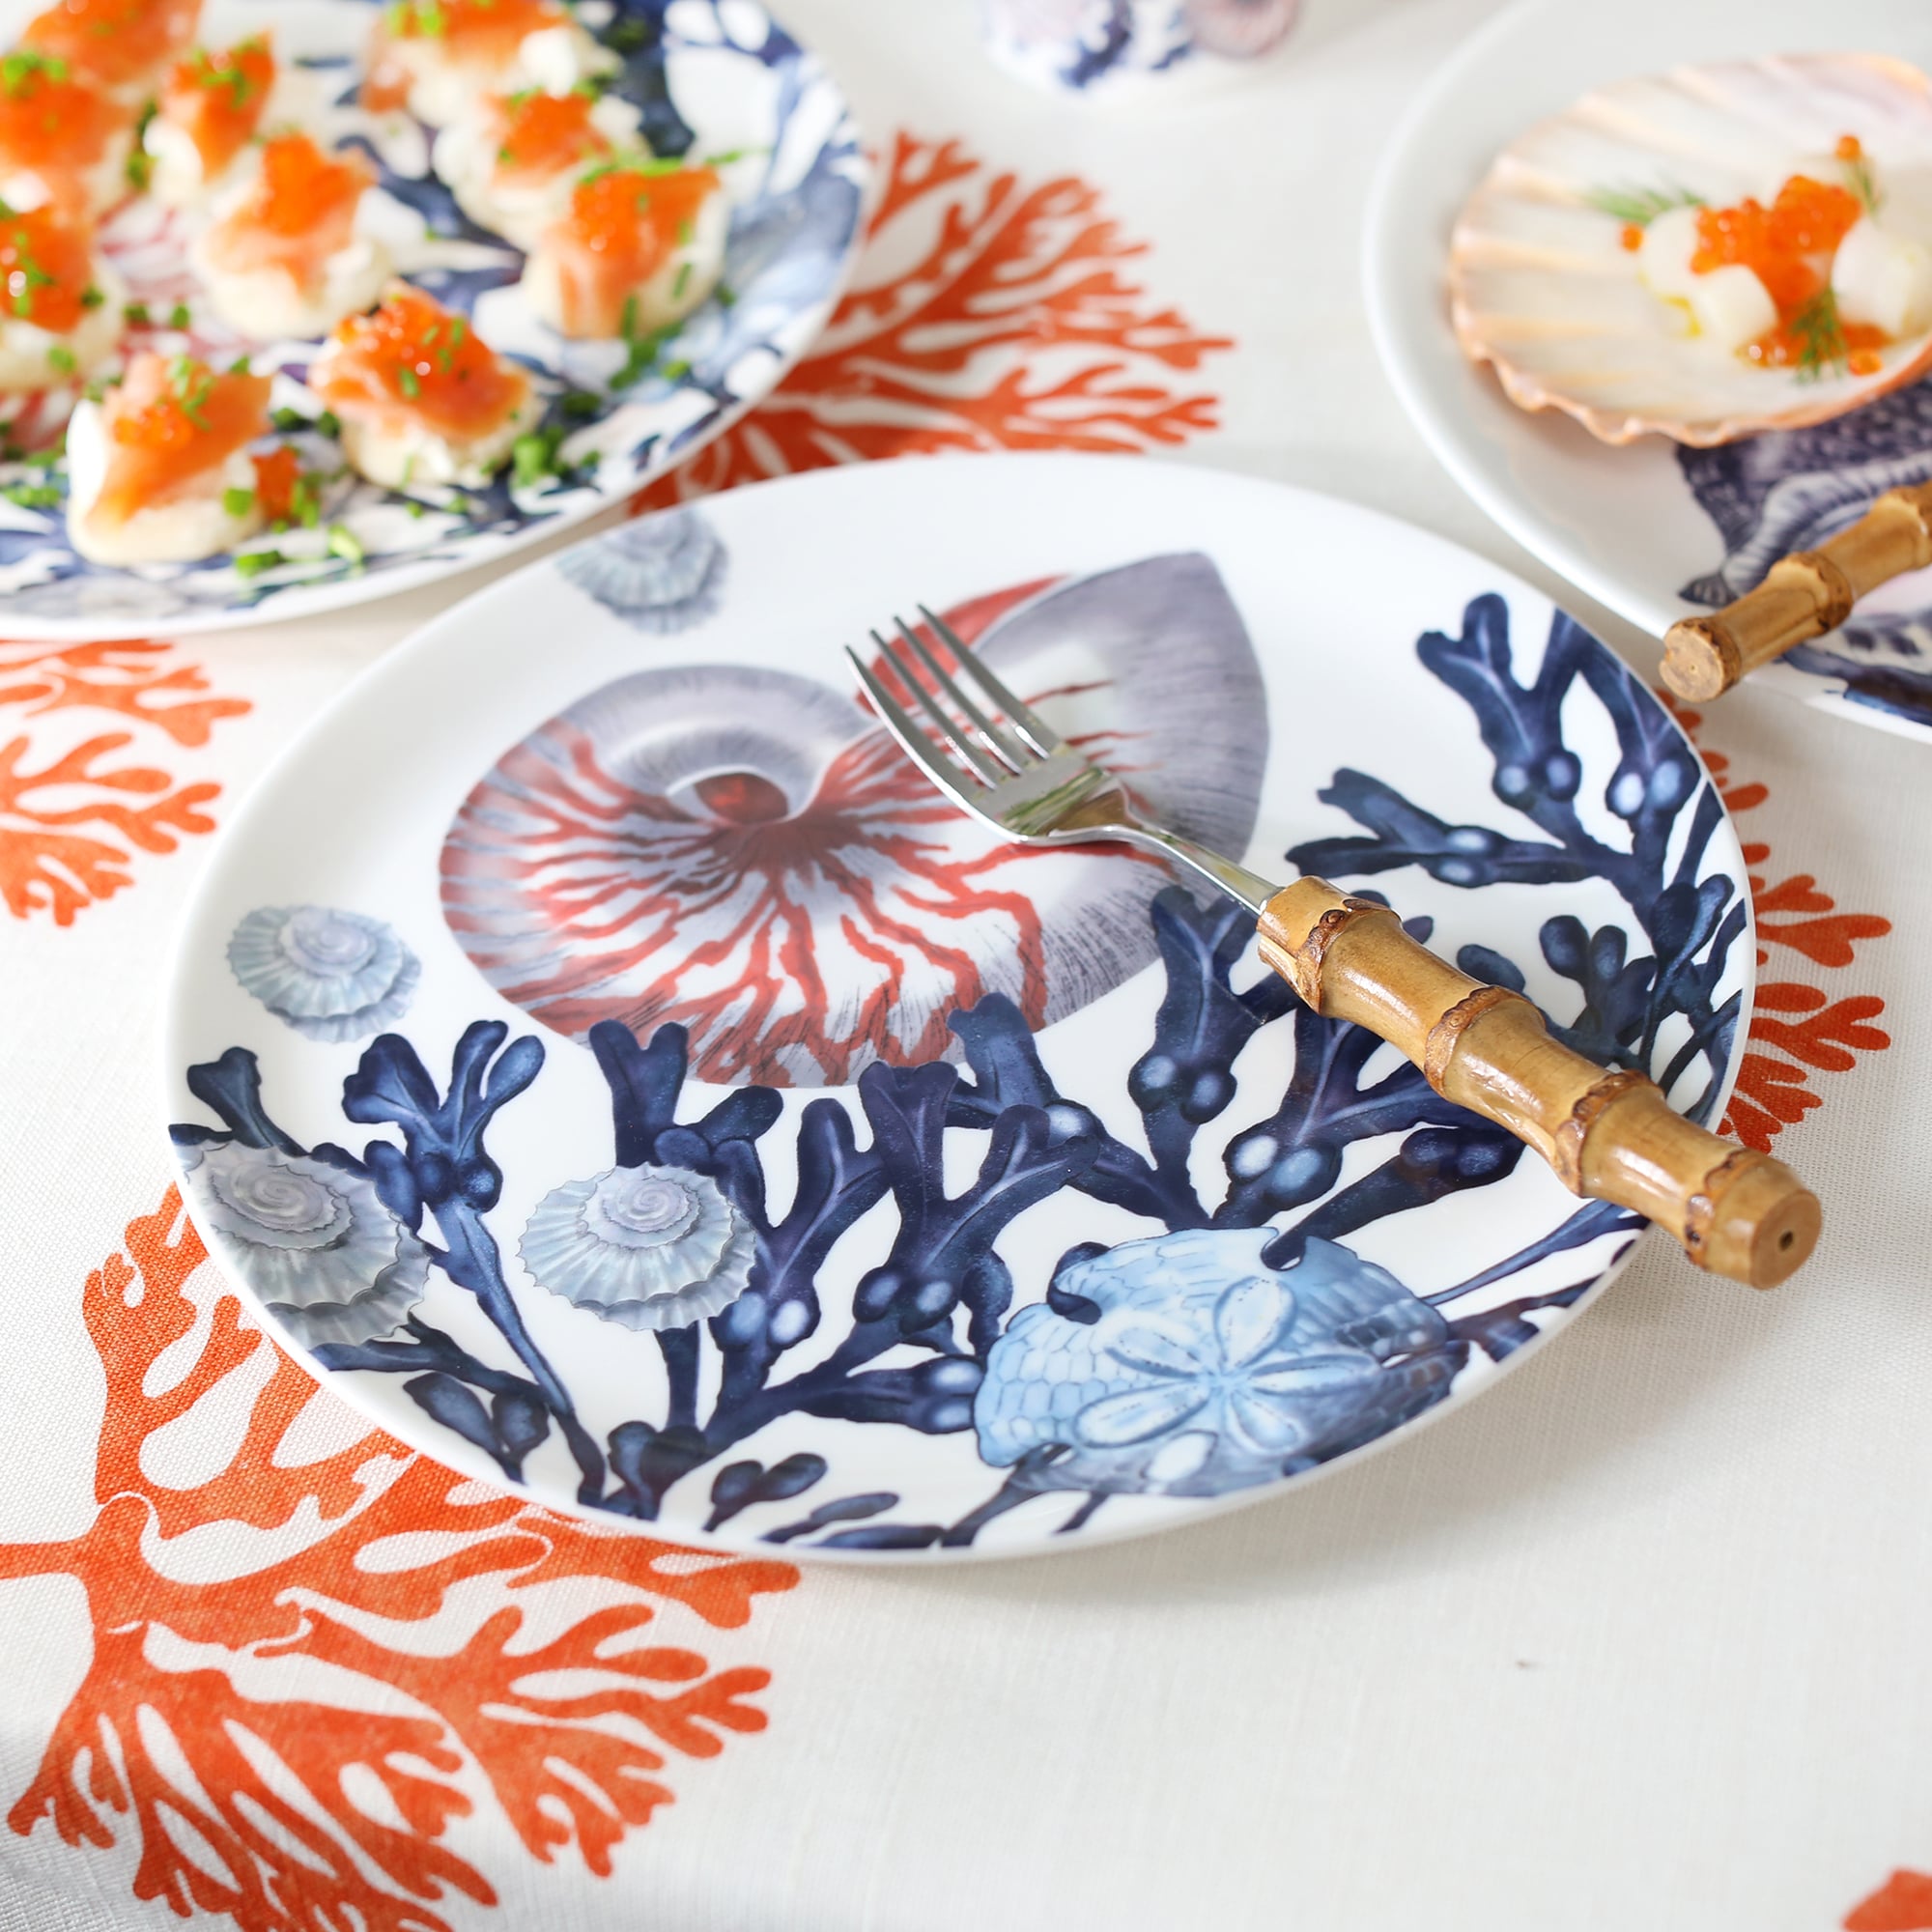 Bone China White Dinner plate with hand drawn illustration of our Beachcomber range on our Orange Fistral fabric.On the plate is a bamboo fork,in the background are plates decorated with salmon other foods